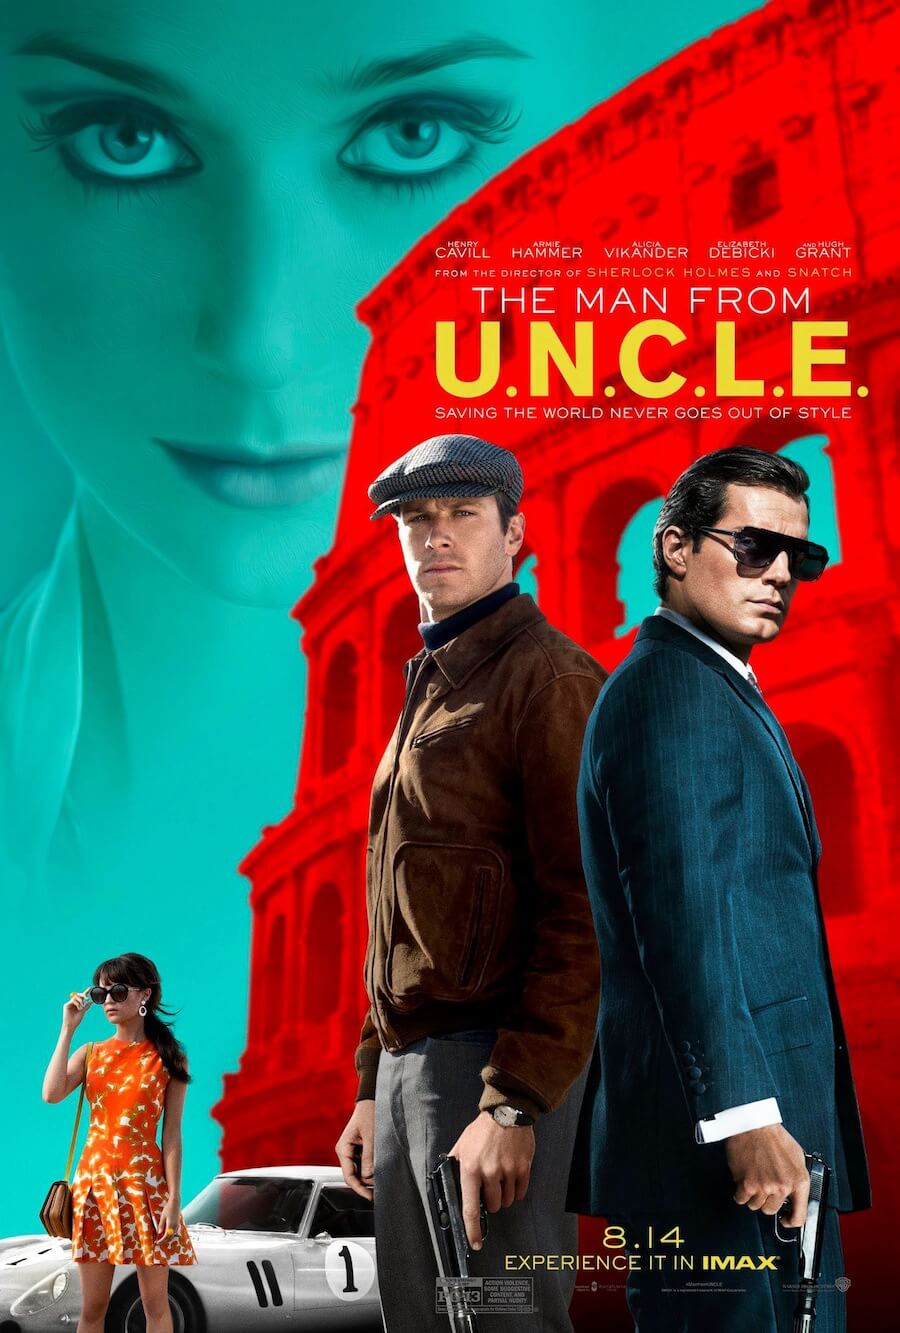 Geek Out New Poster For Guy Ritchie S The Man From U N C L E Pops Up